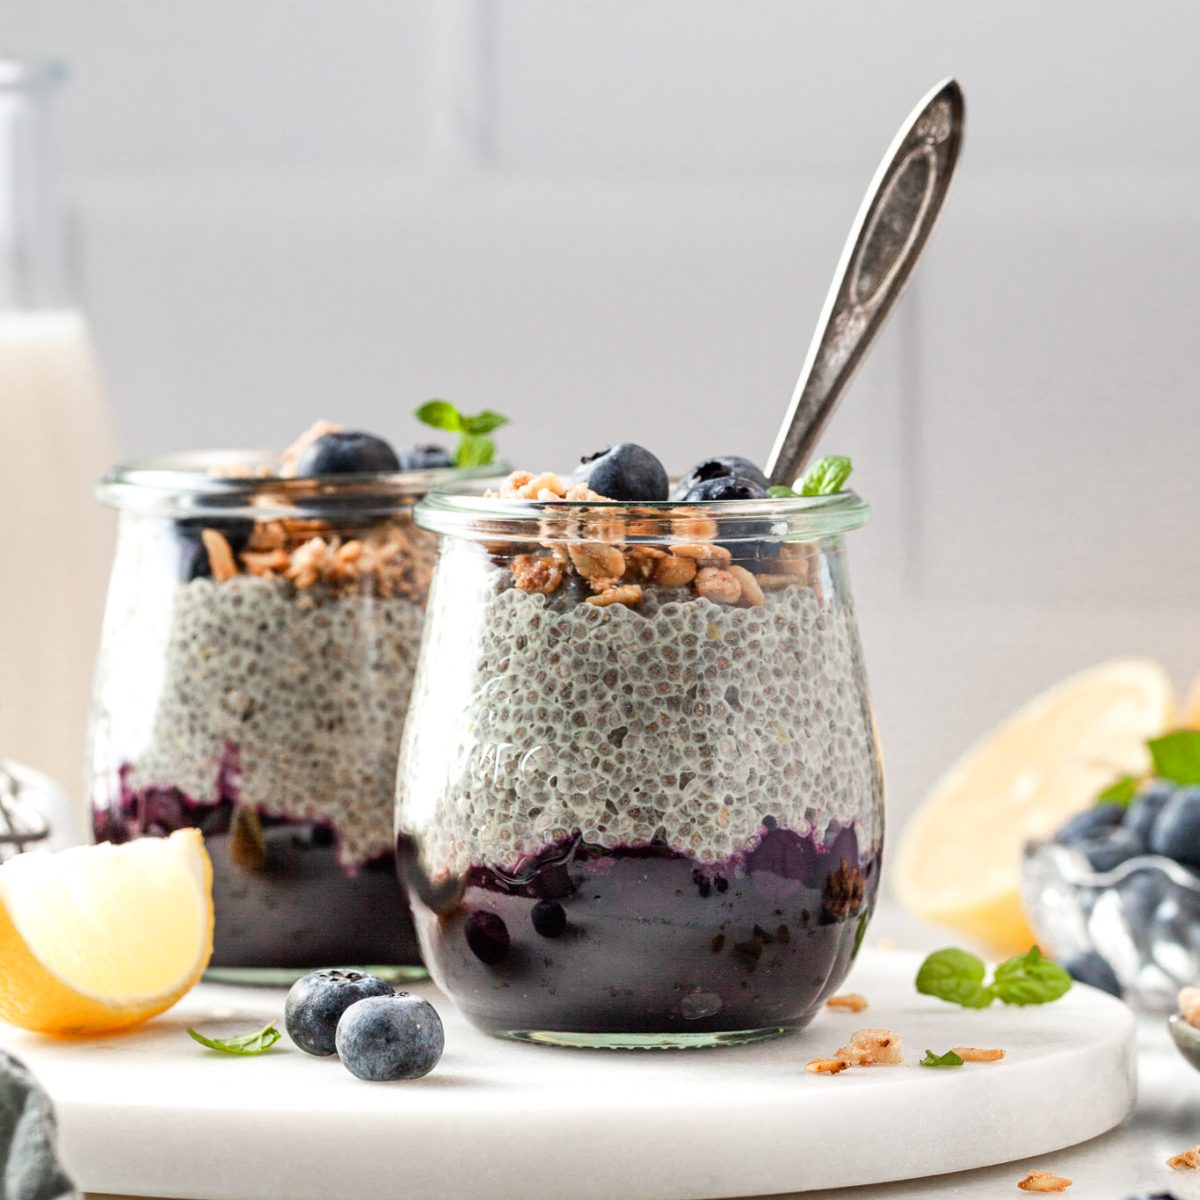 Lemon Chia Pudding with Blueberry Compote - Crumbs & Caramel